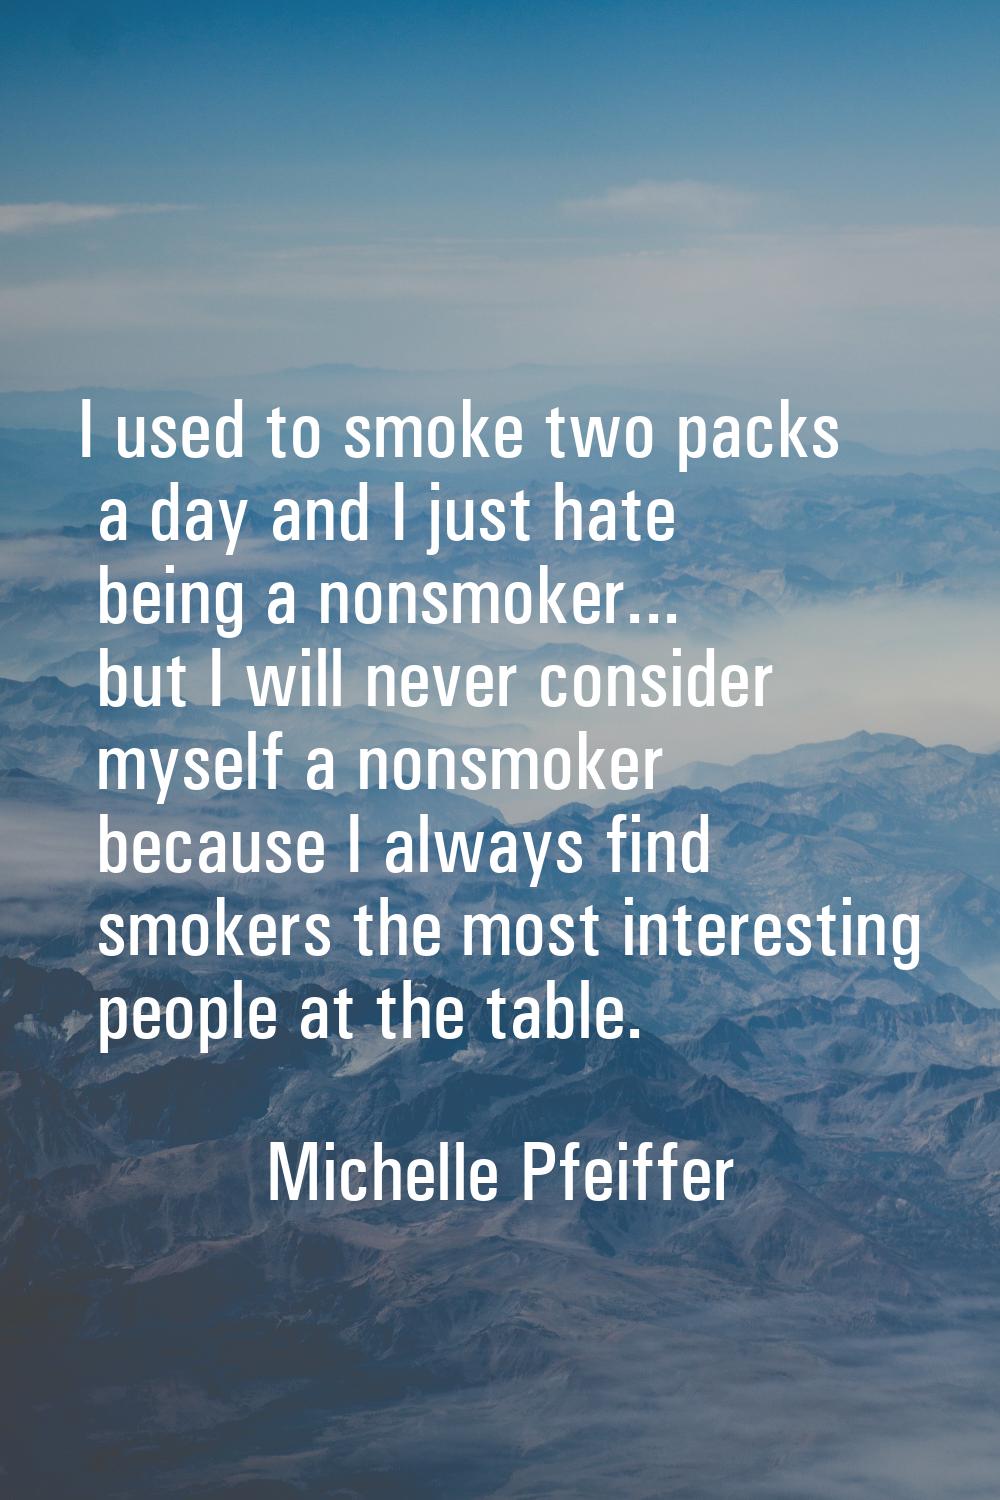 I used to smoke two packs a day and I just hate being a nonsmoker... but I will never consider myse